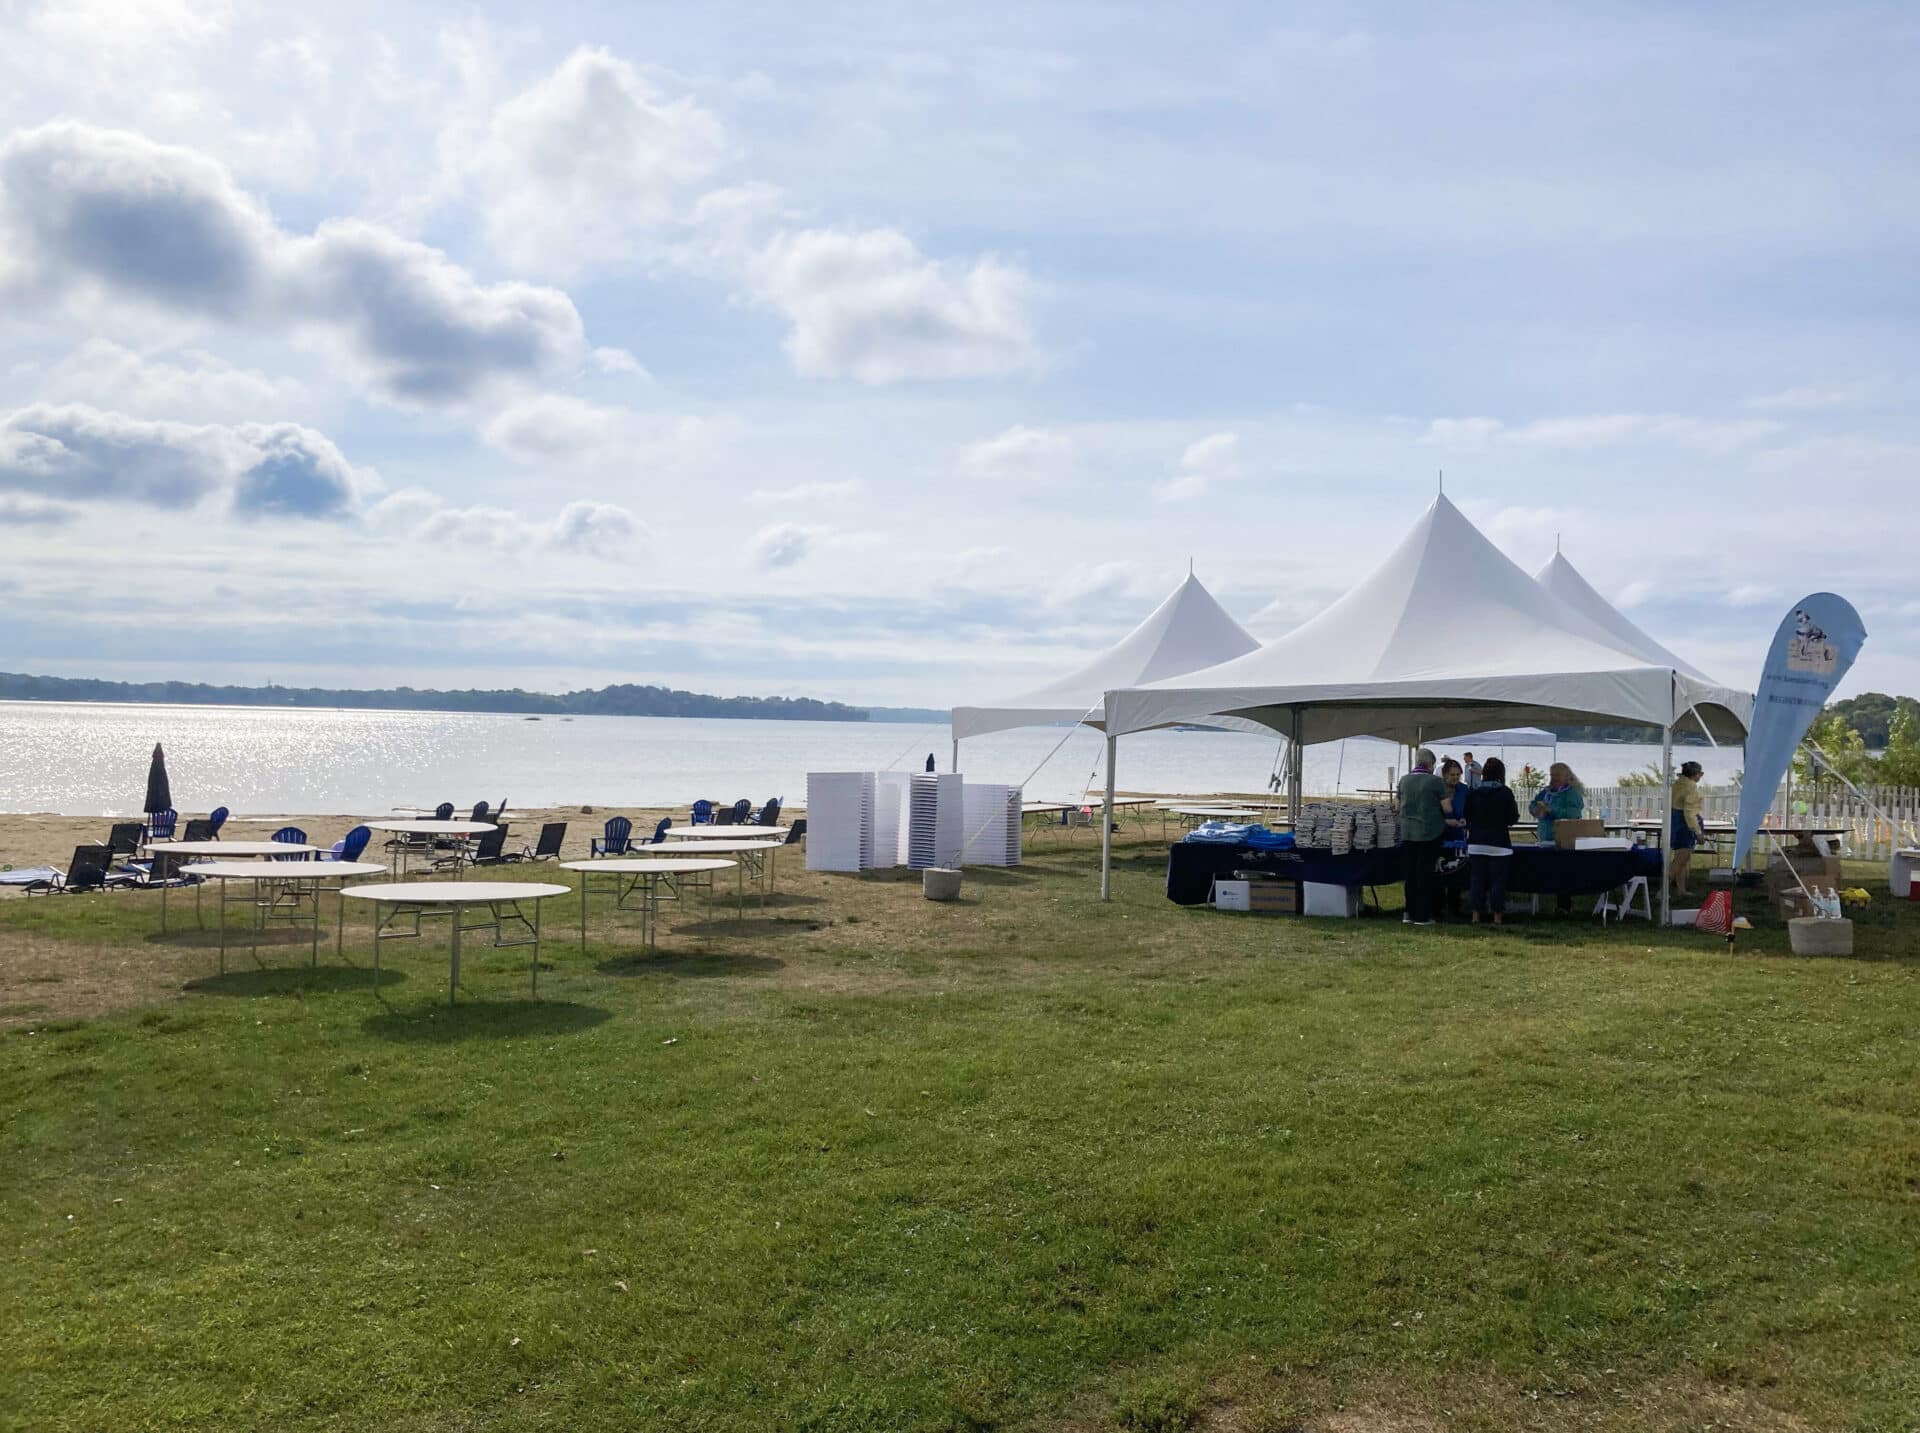 Vendor Event with High Peak Tent by the Lake